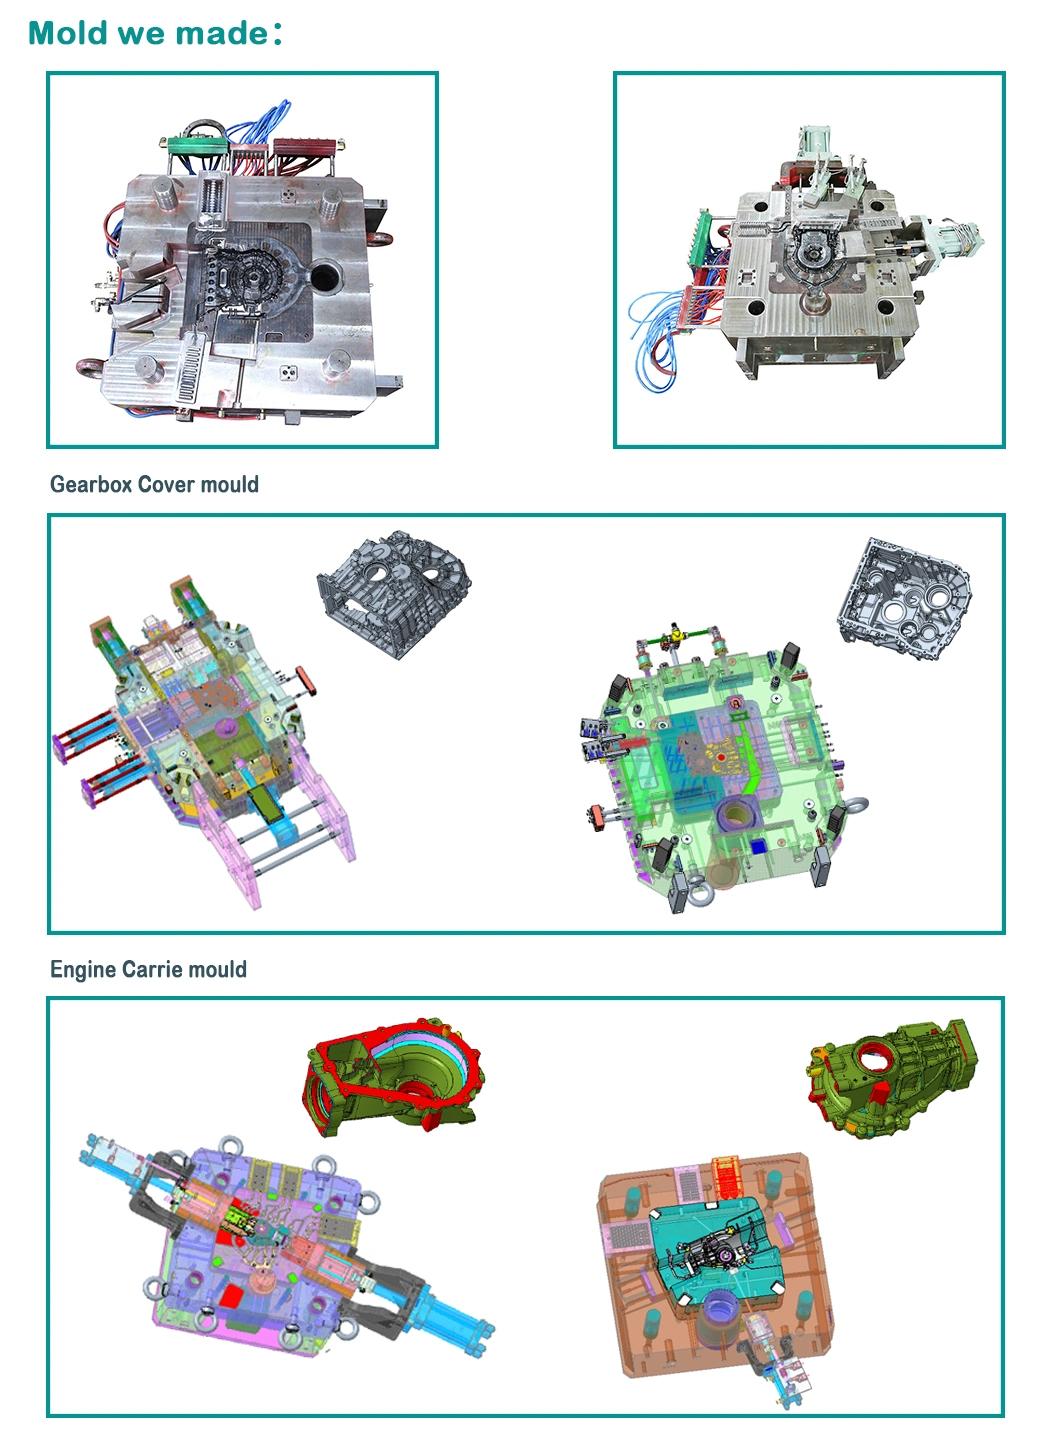 High Precision Hpdc Injection Molding Casting Mold Aluminium Die Casting Mold Die Casting Die for Communications Parts